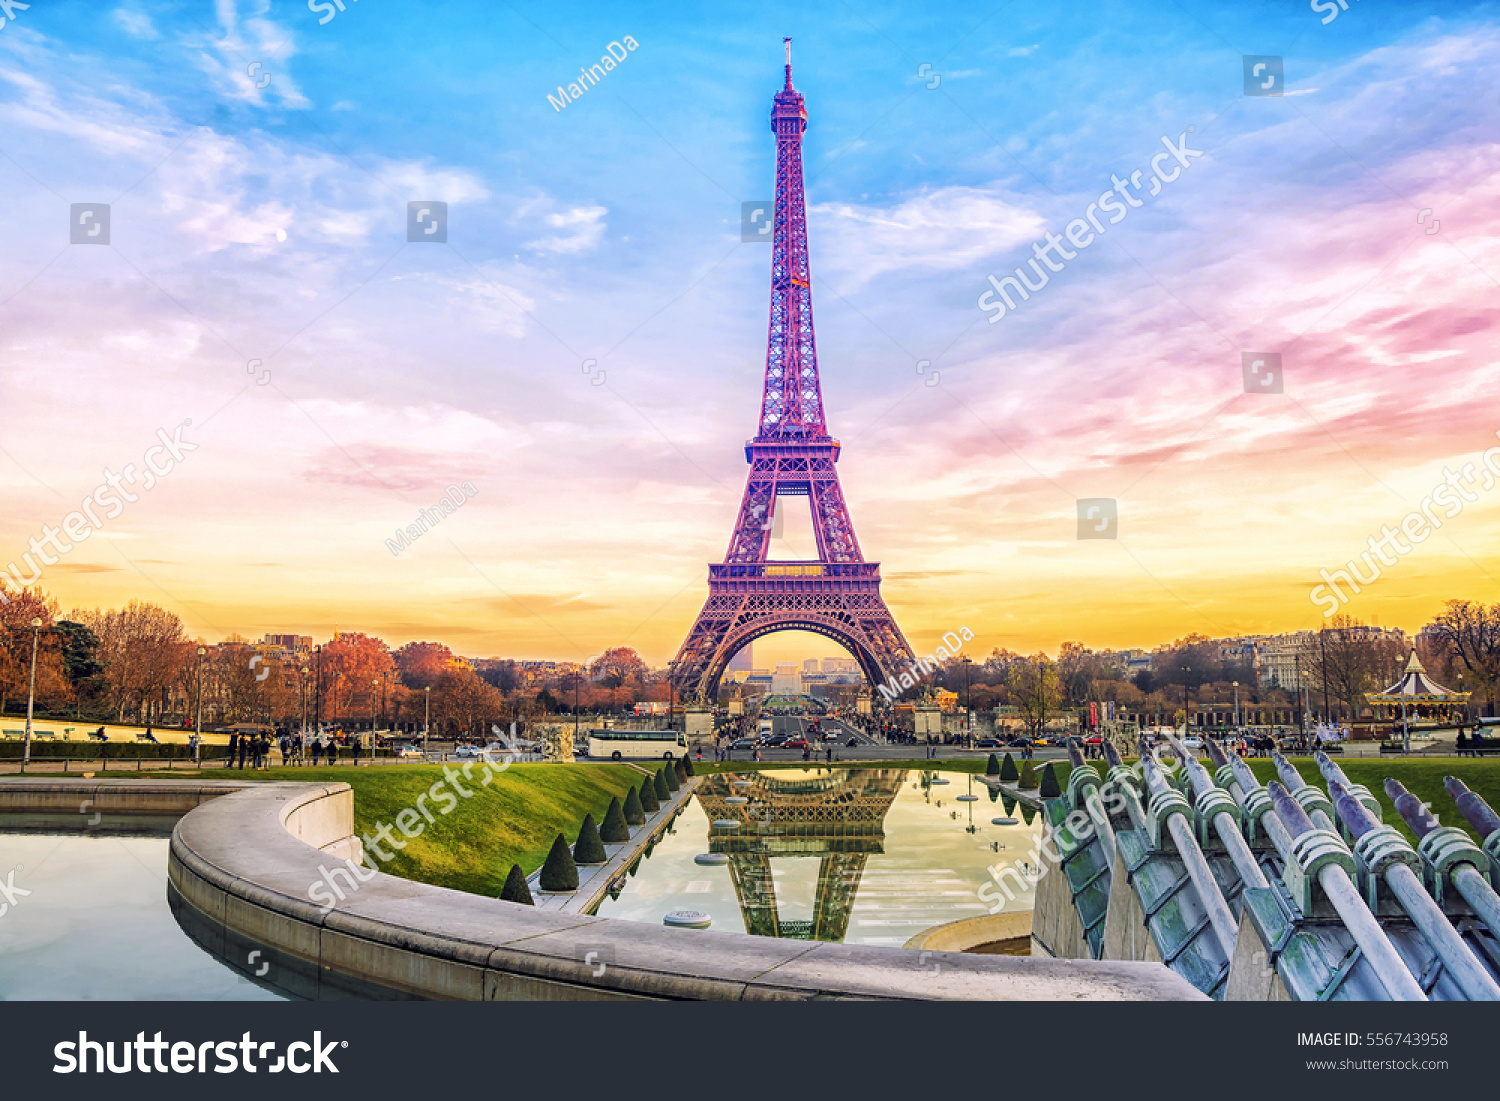 Eiffel Tower at sunset in Paris, France. Romantic travel background. #556743958